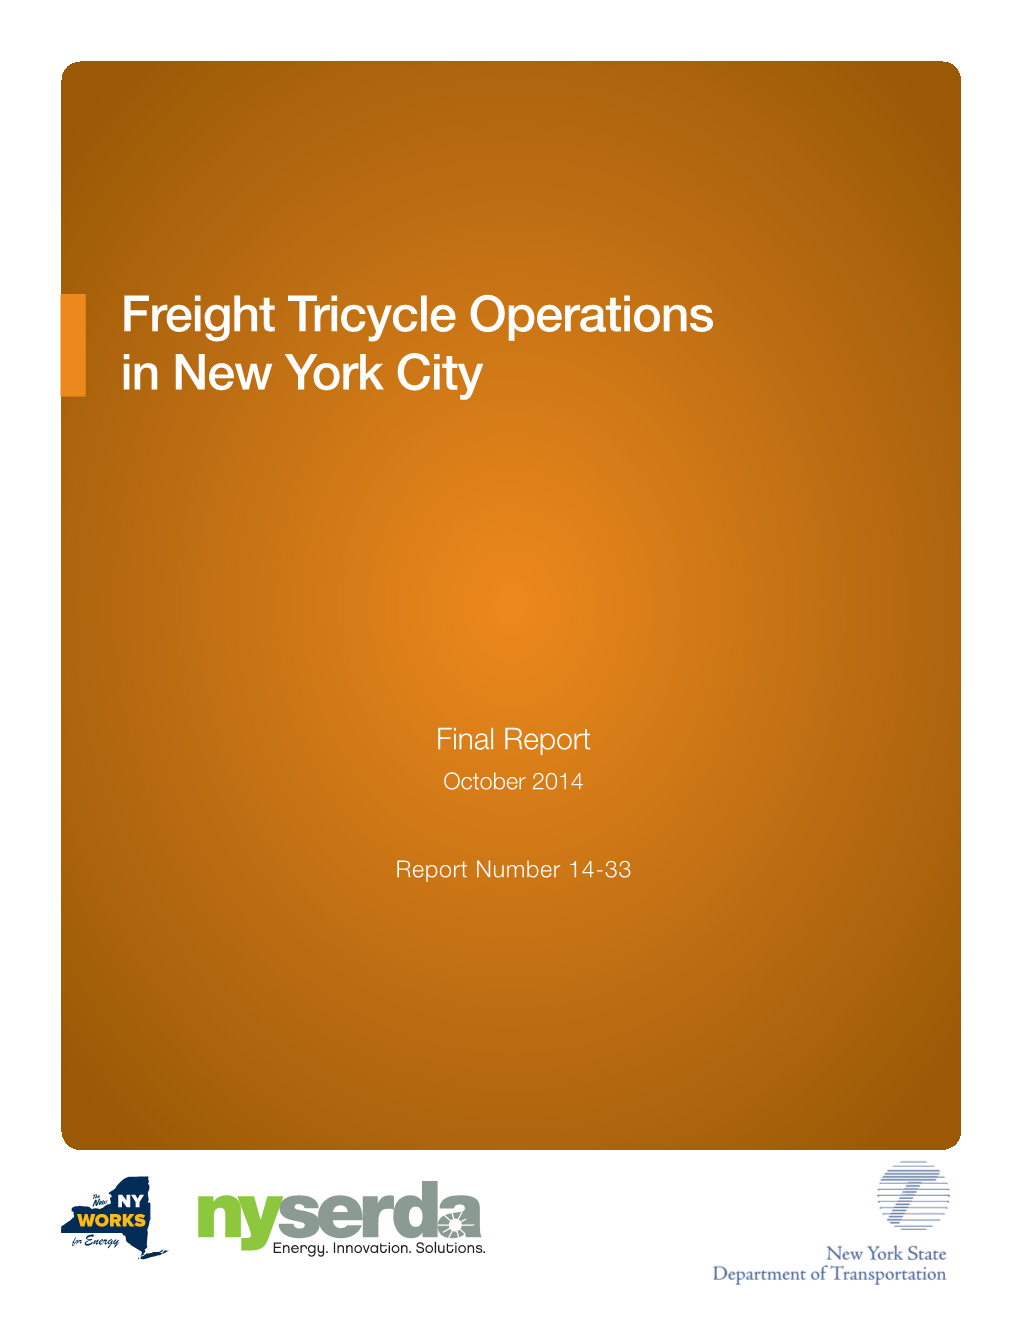 Freight Tricycle Operations in New York City